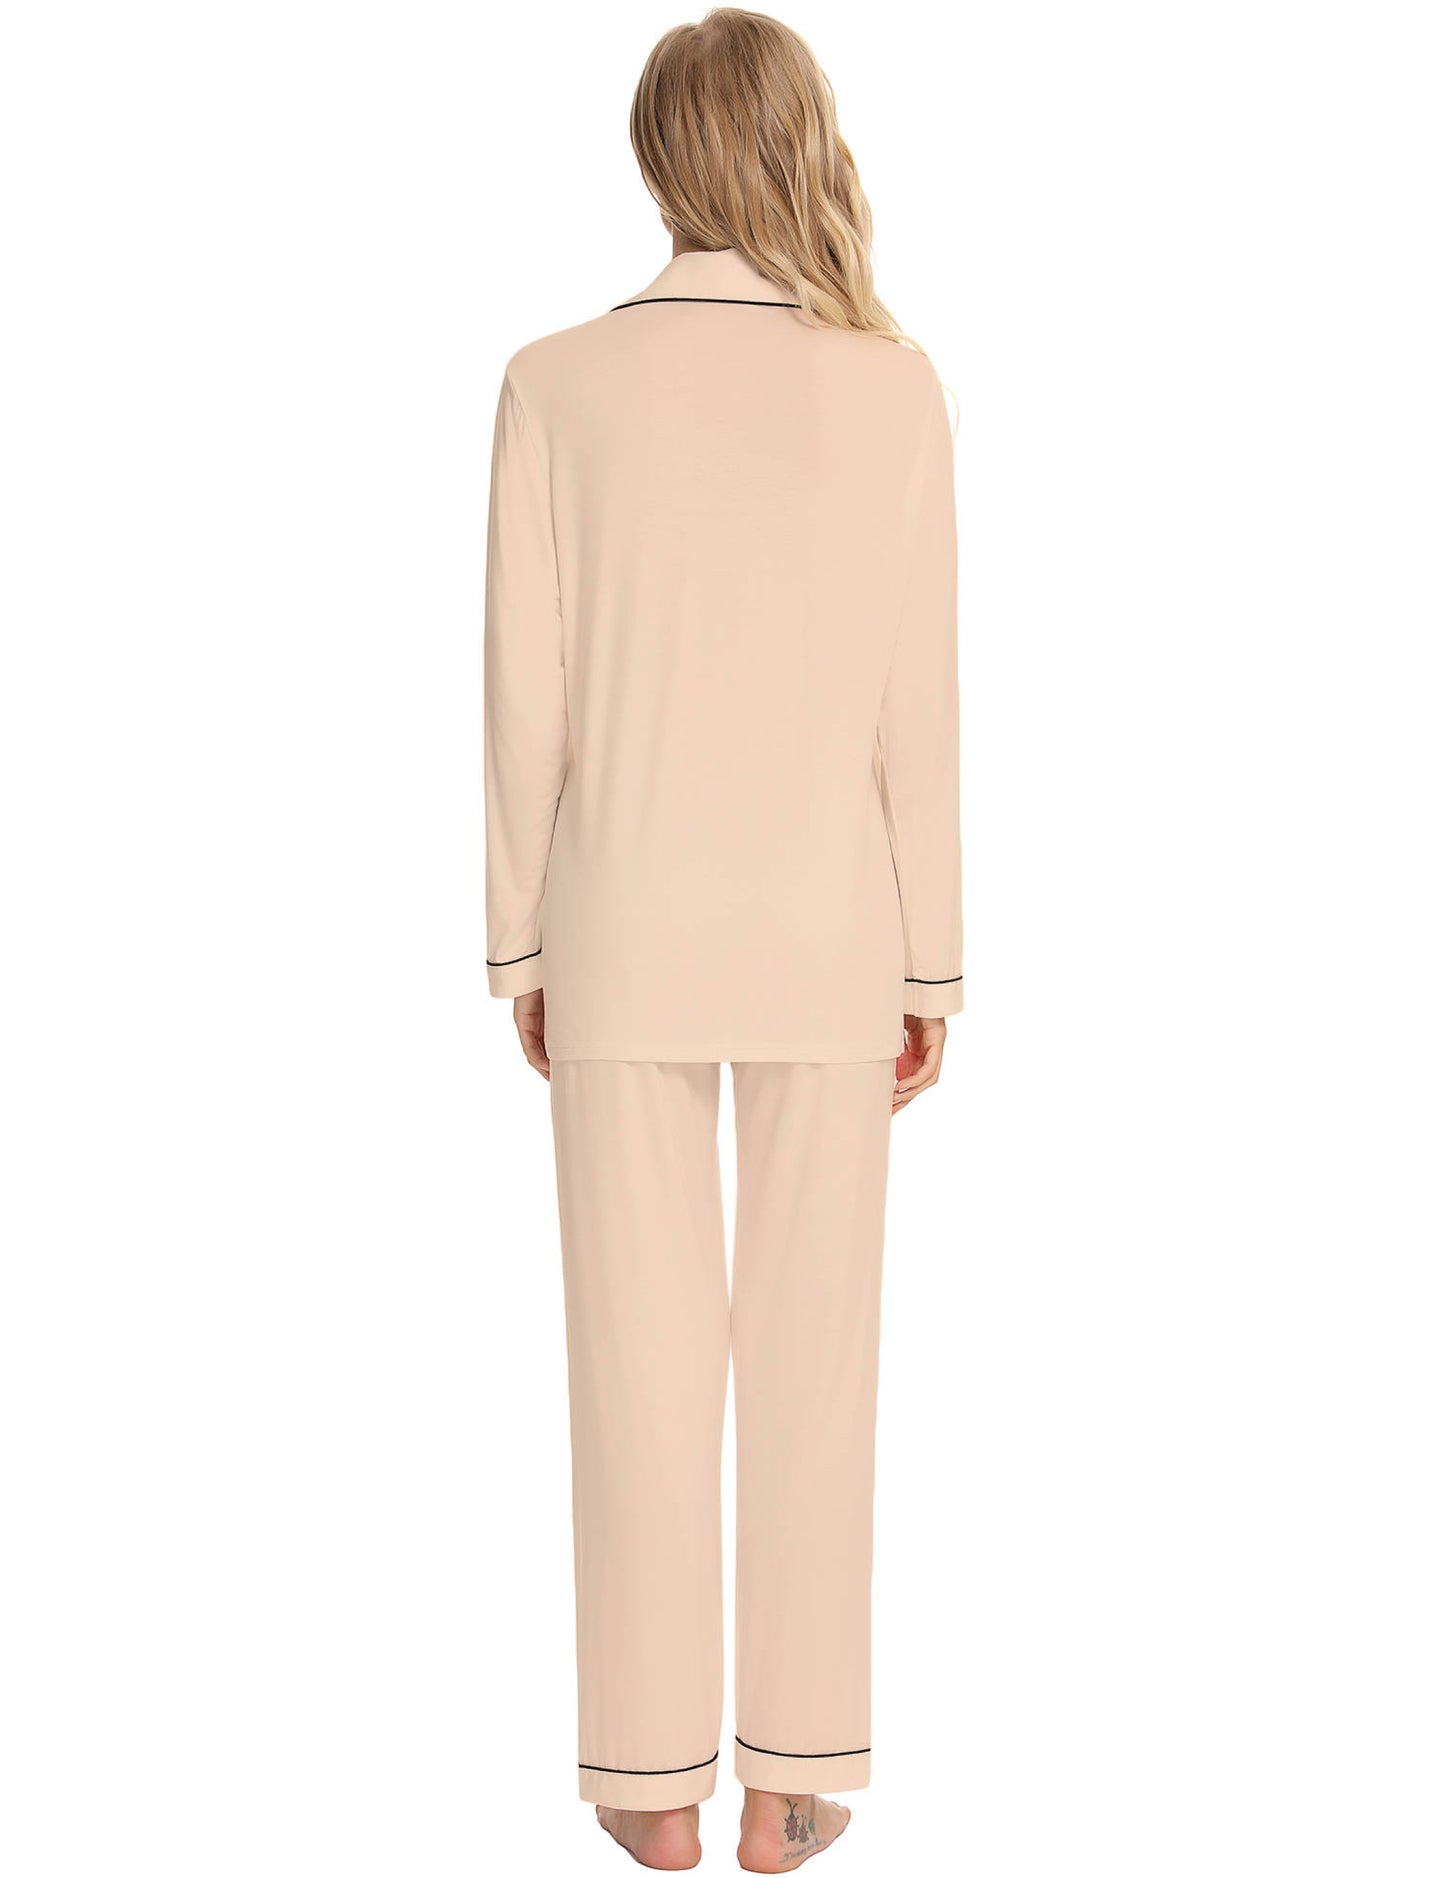 Long Sleeve Buttoned Bamboo PJ's Set - Nude